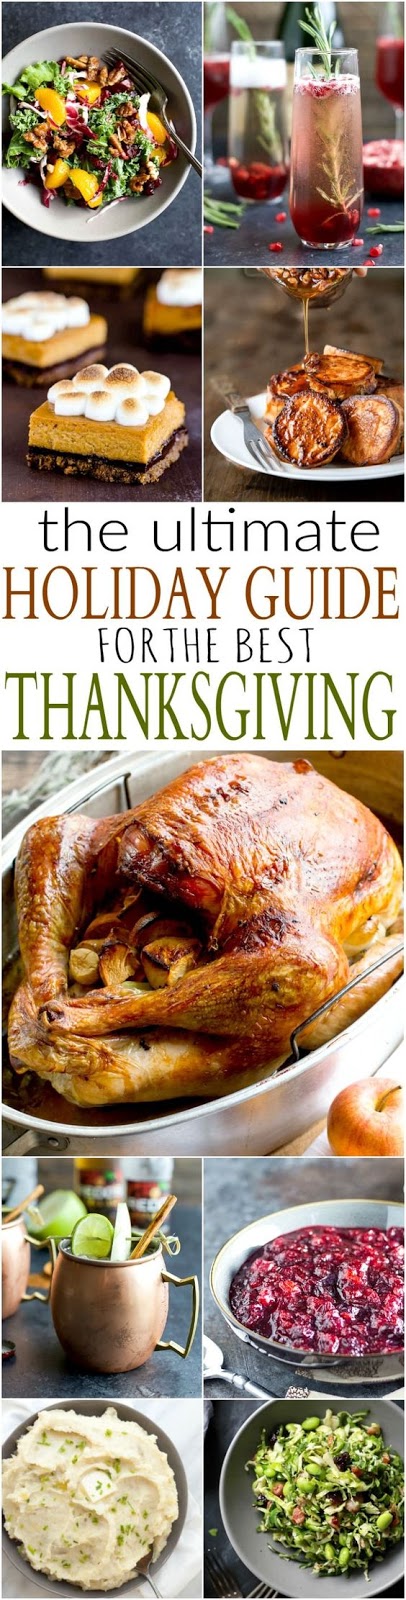 50+ Best Recipes Ideas For Traditional Thanksgiving Day